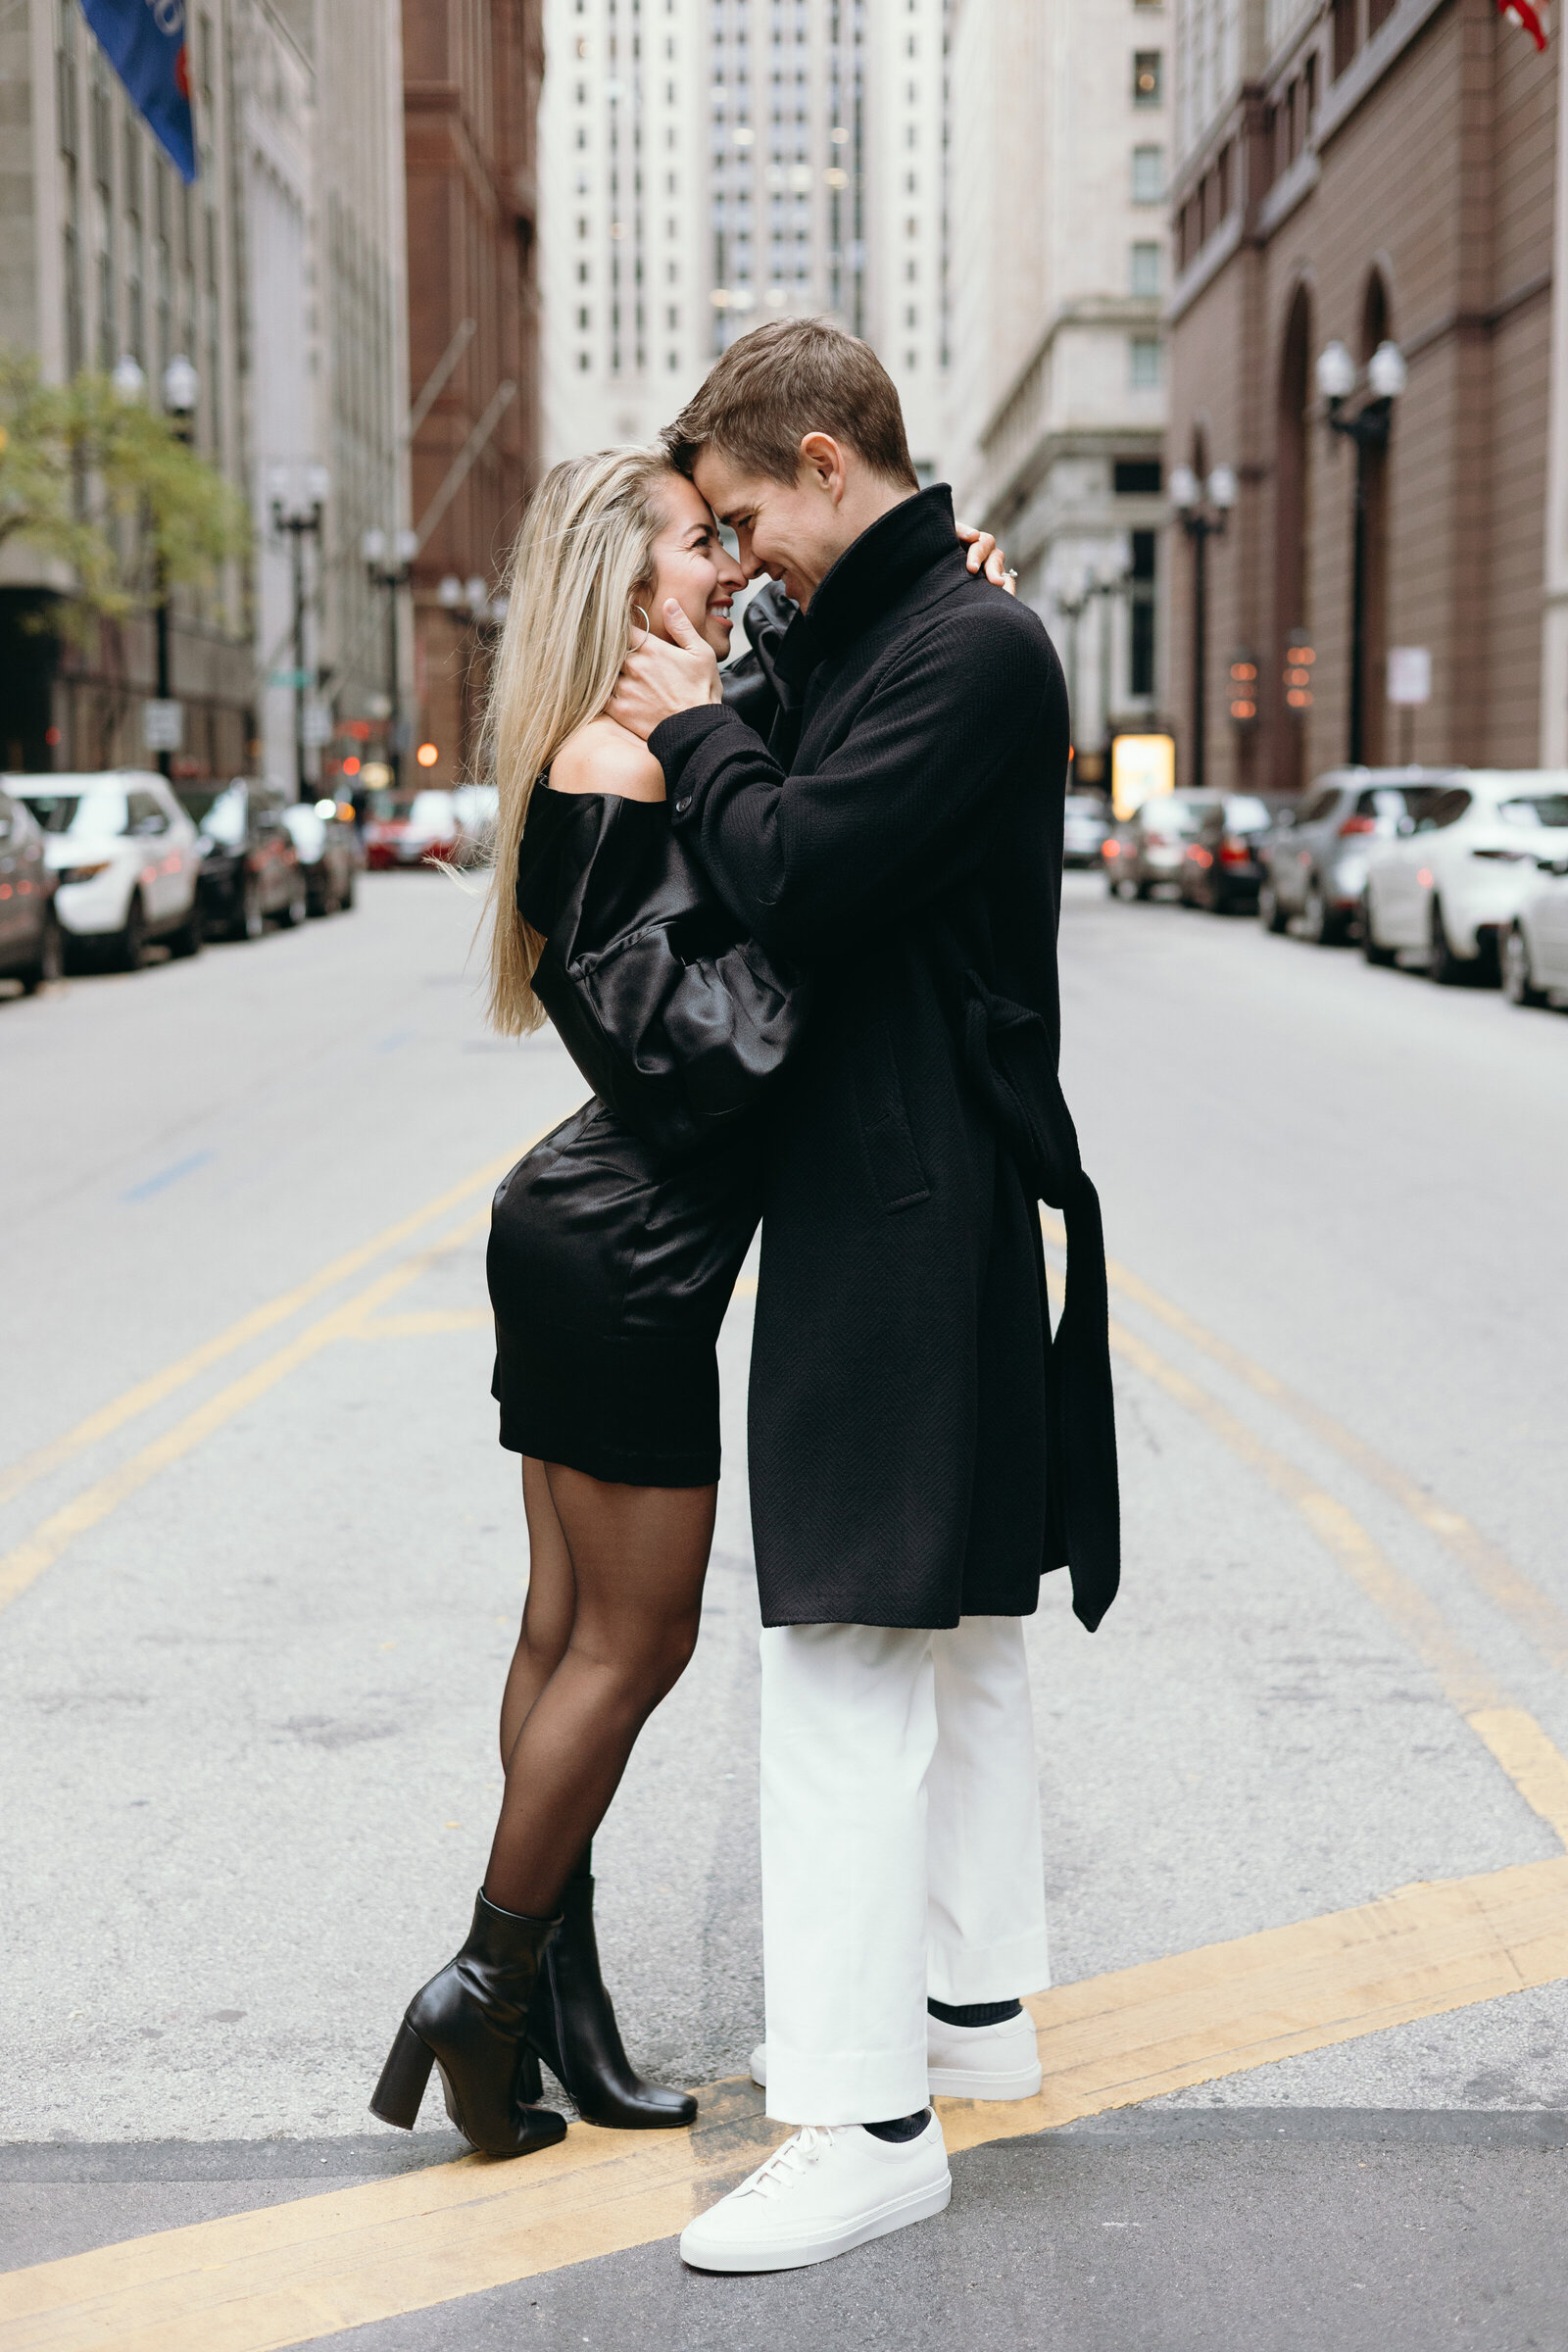 Z Photo and Film - Cody and Silvana's Chicago Engagement Shoot - Chicago, Illinois-70